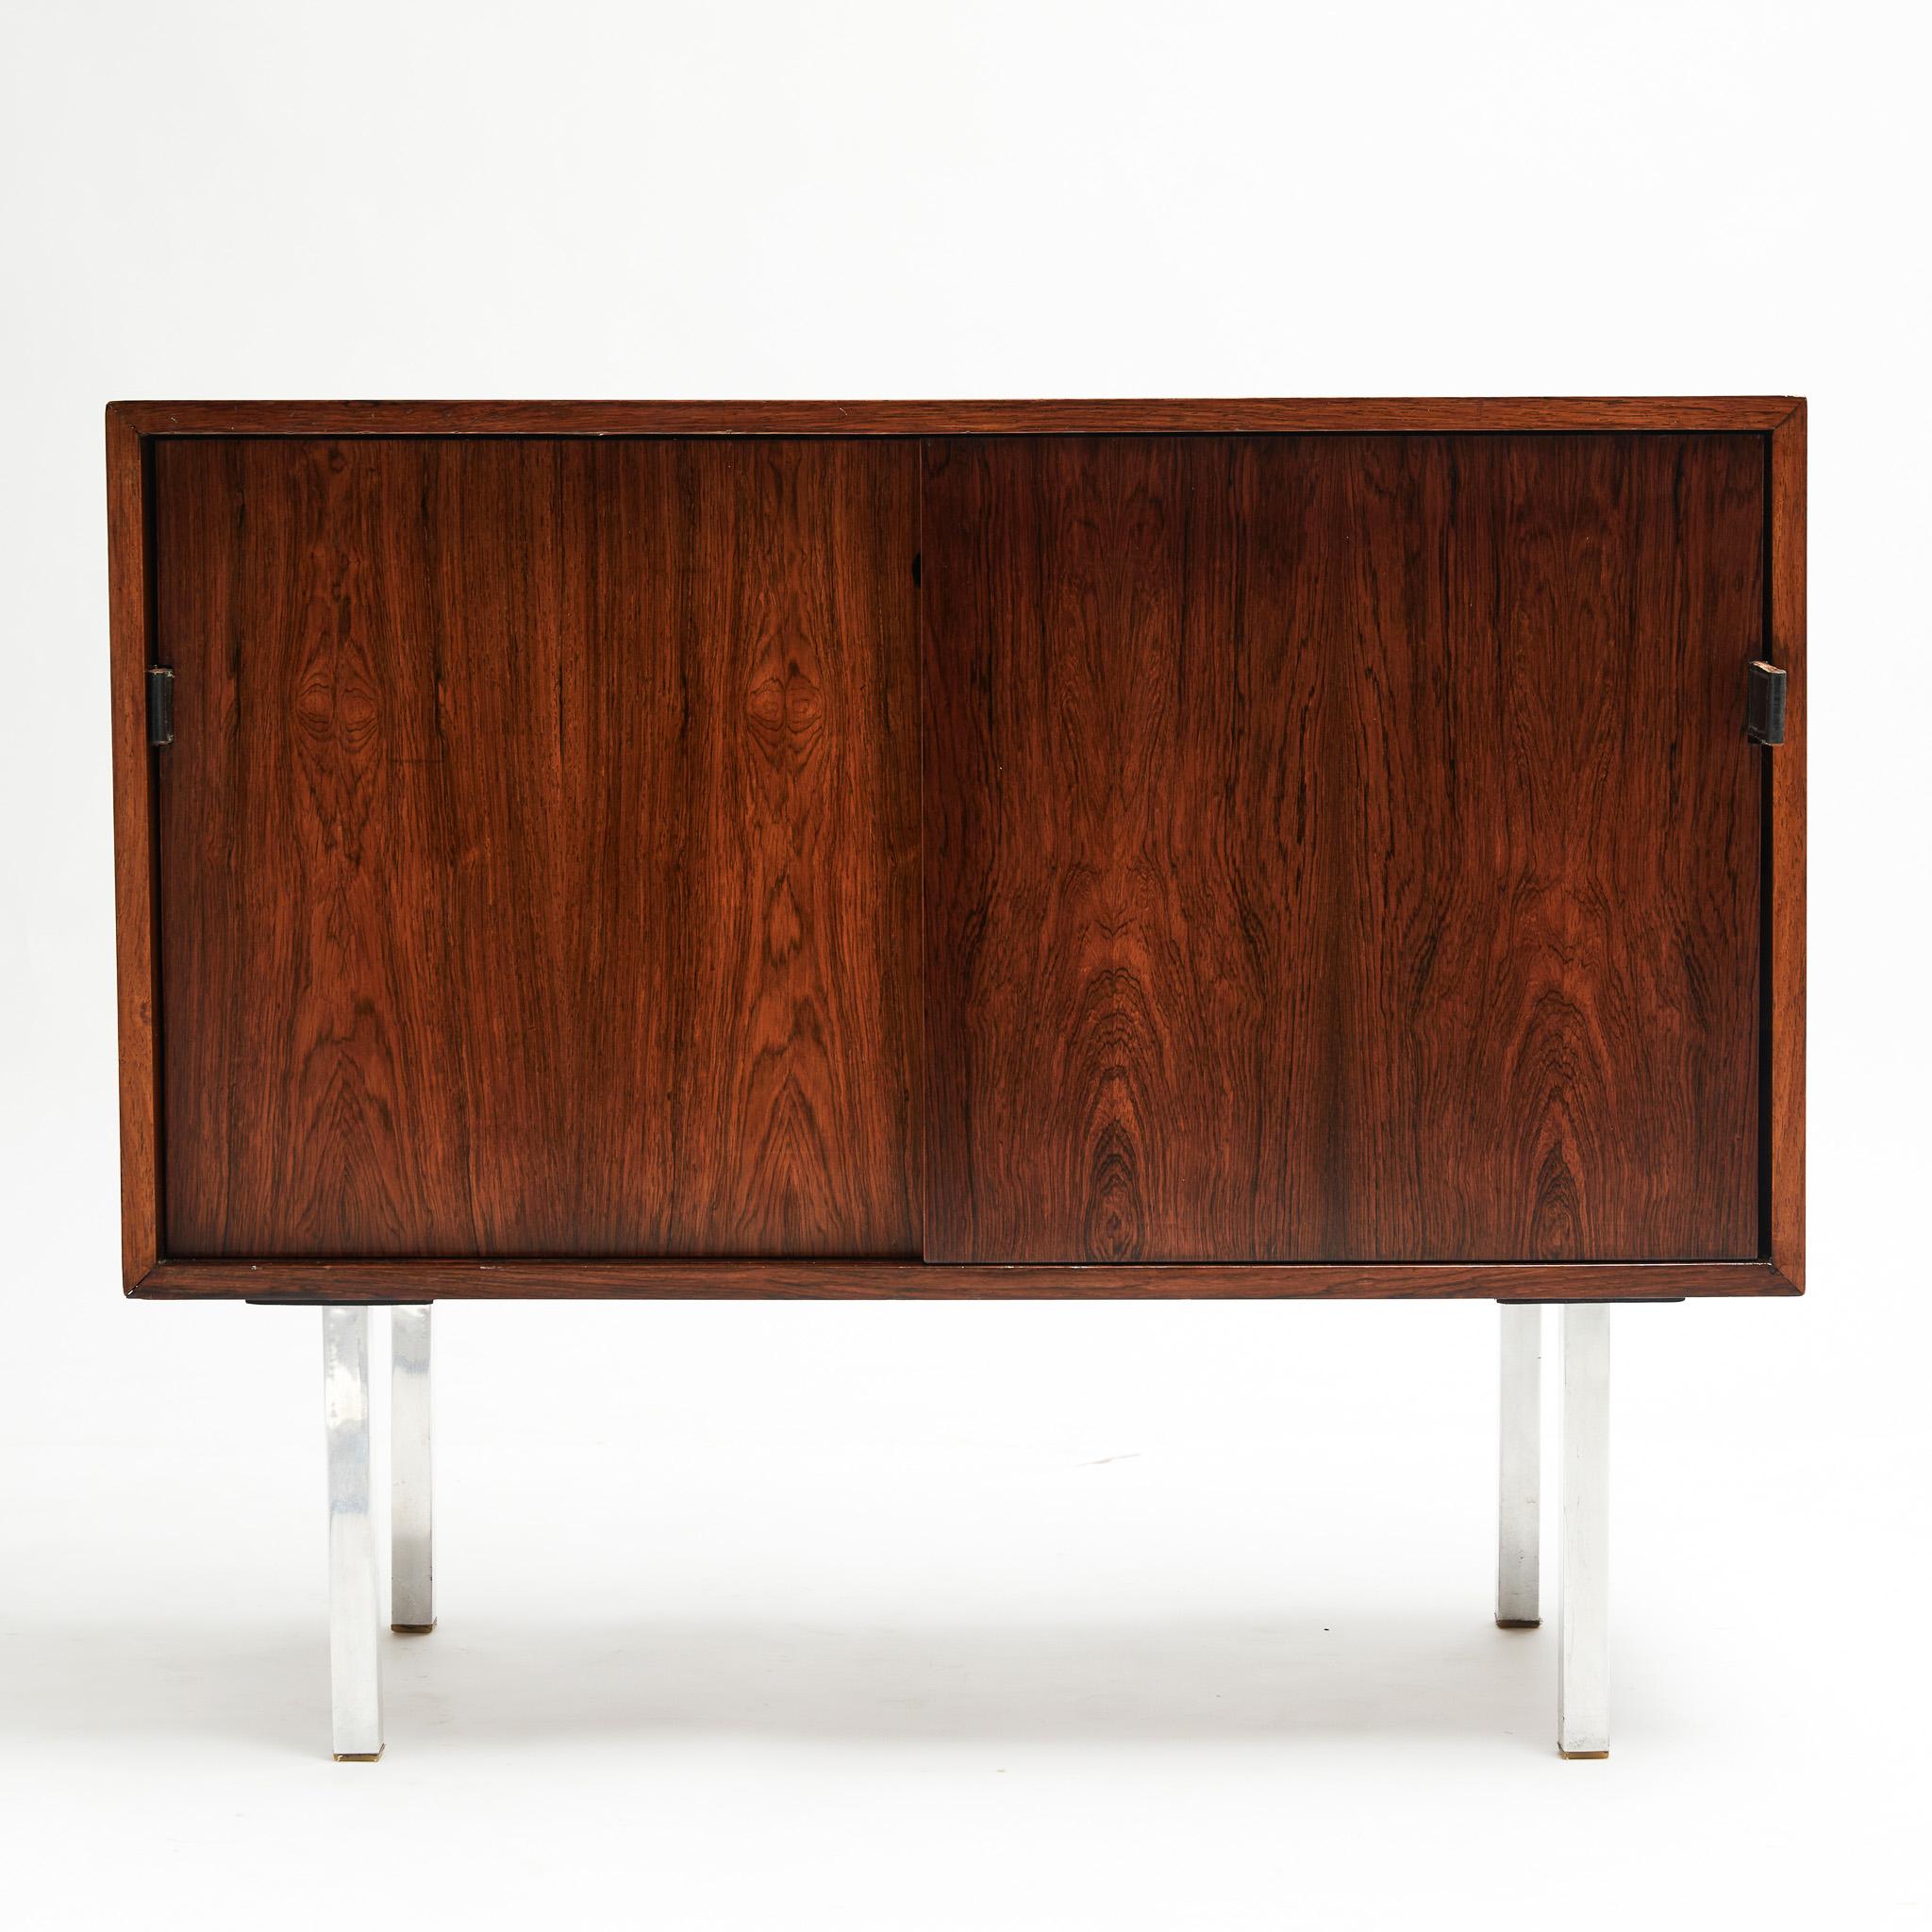 Hand-Painted Midcentury Chest in Hardwood & Chrome by Forma Moveis, 1965 Brazil, Sealed For Sale